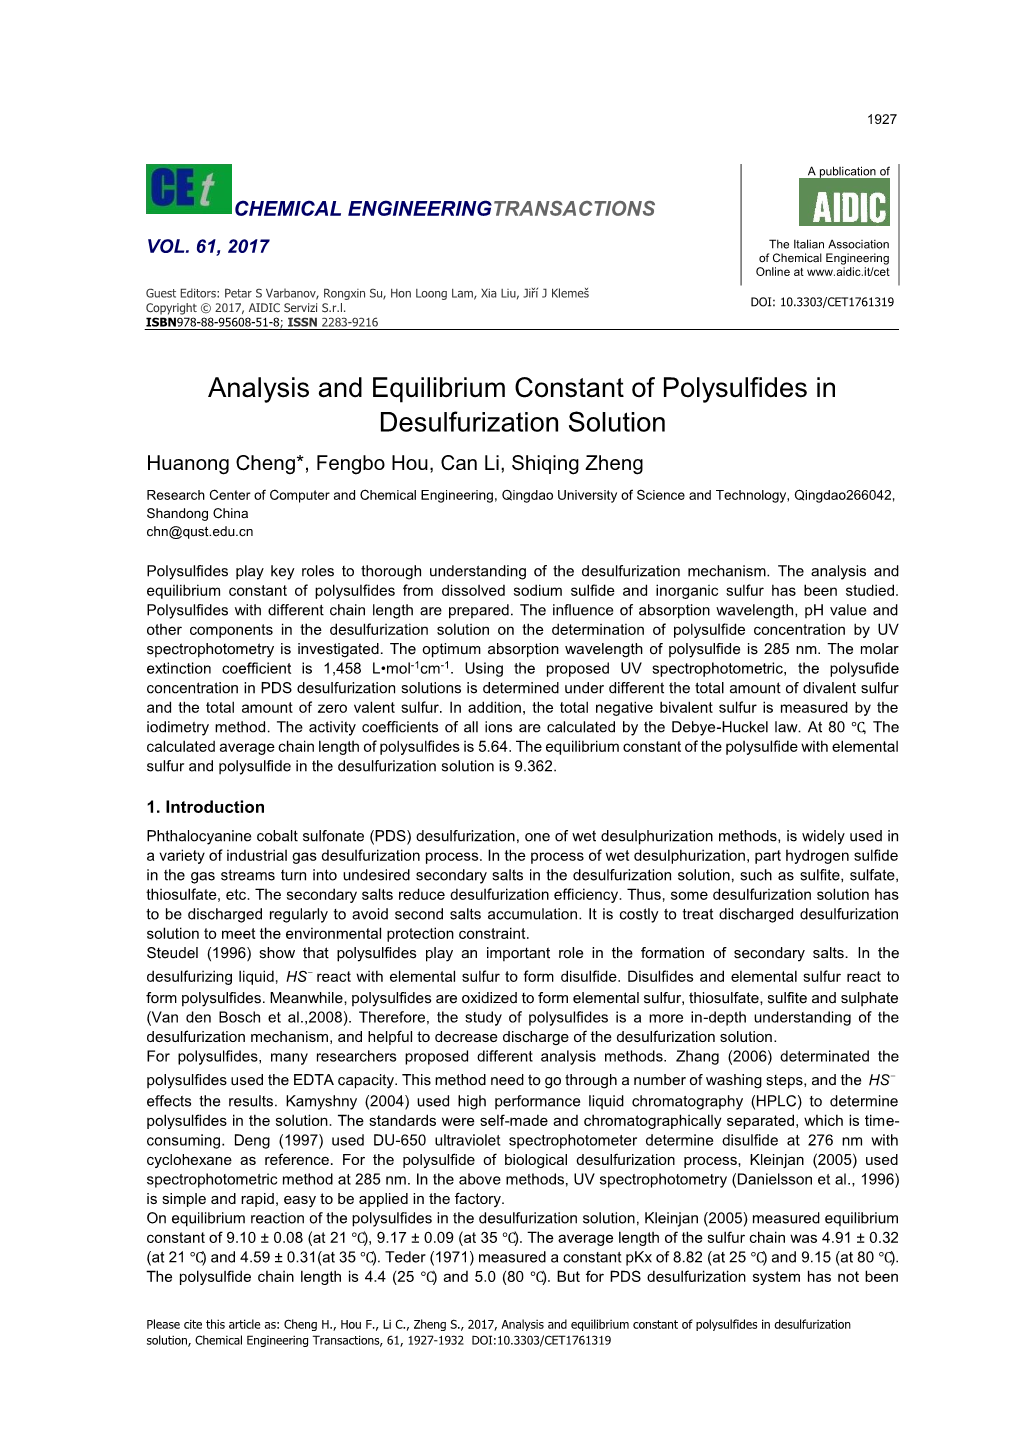 Analysis and Equilibrium Constant of Polysulfides in Desulfurization Solution, Chemical Engineering Transactions, 61, 1927-1932 DOI:10.3303/CET1761319